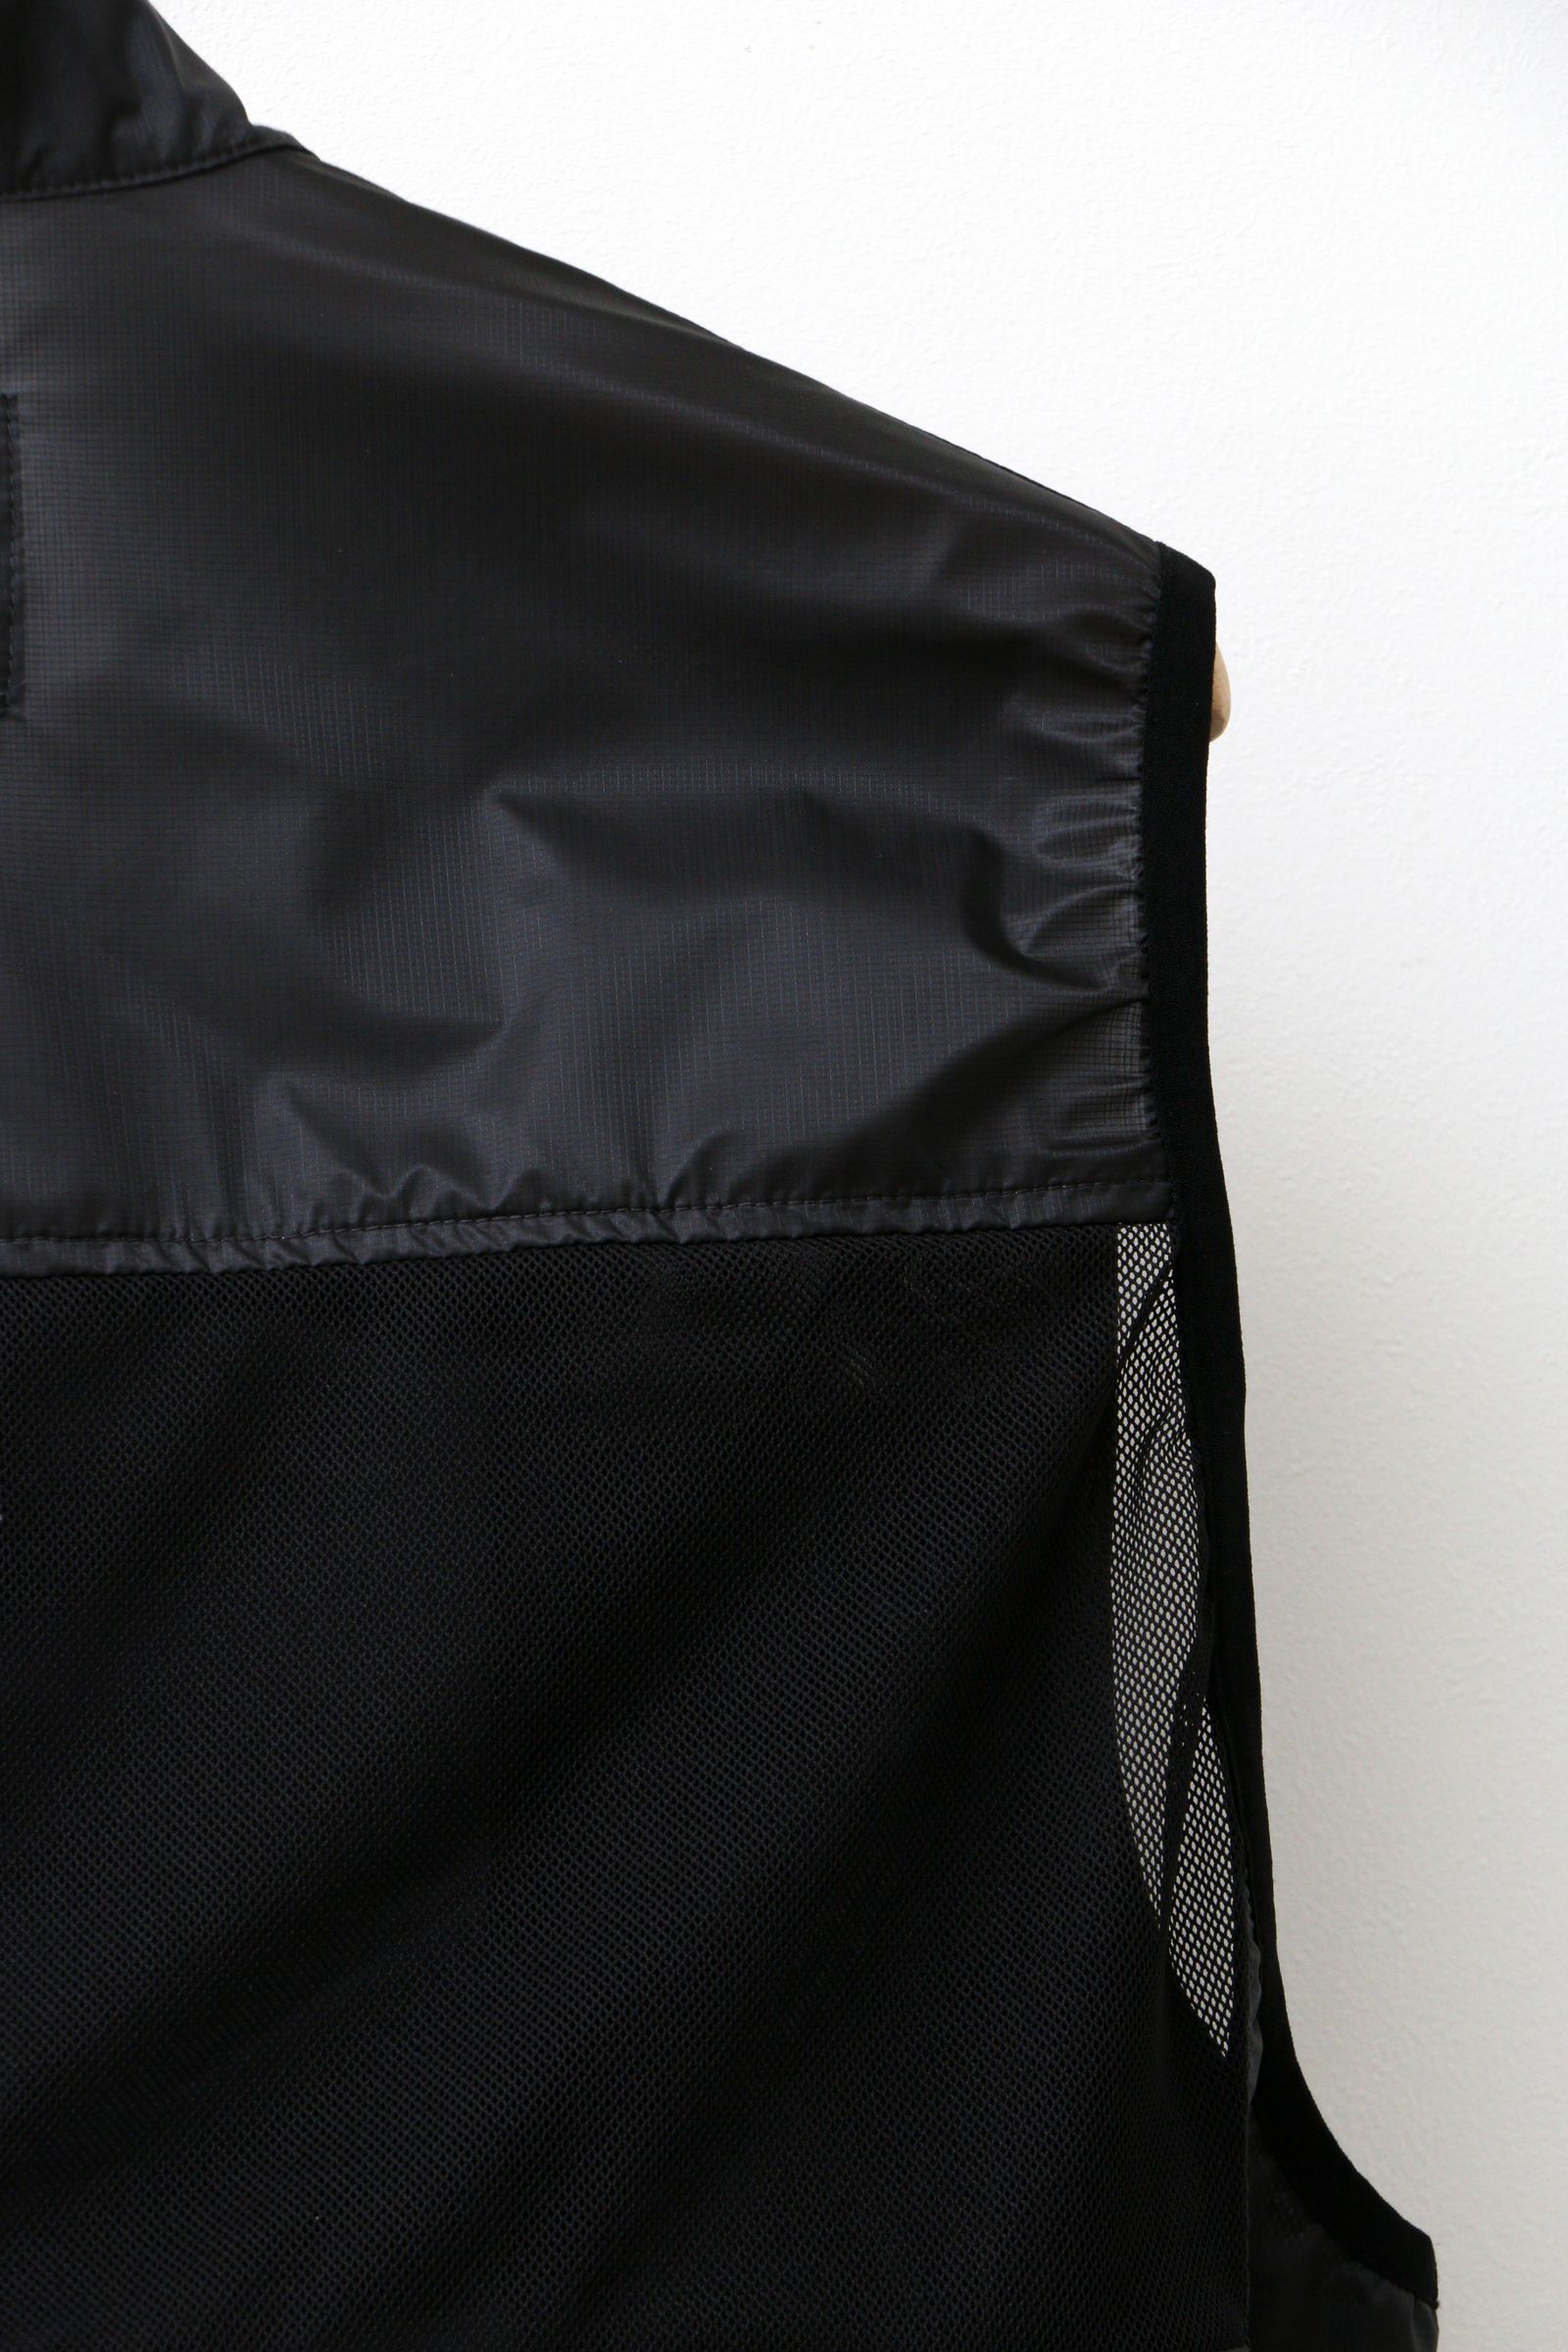 bal - STEALTH POCKET PANEL VEST IDEA FROM GEEK OUT STORE Charcoal